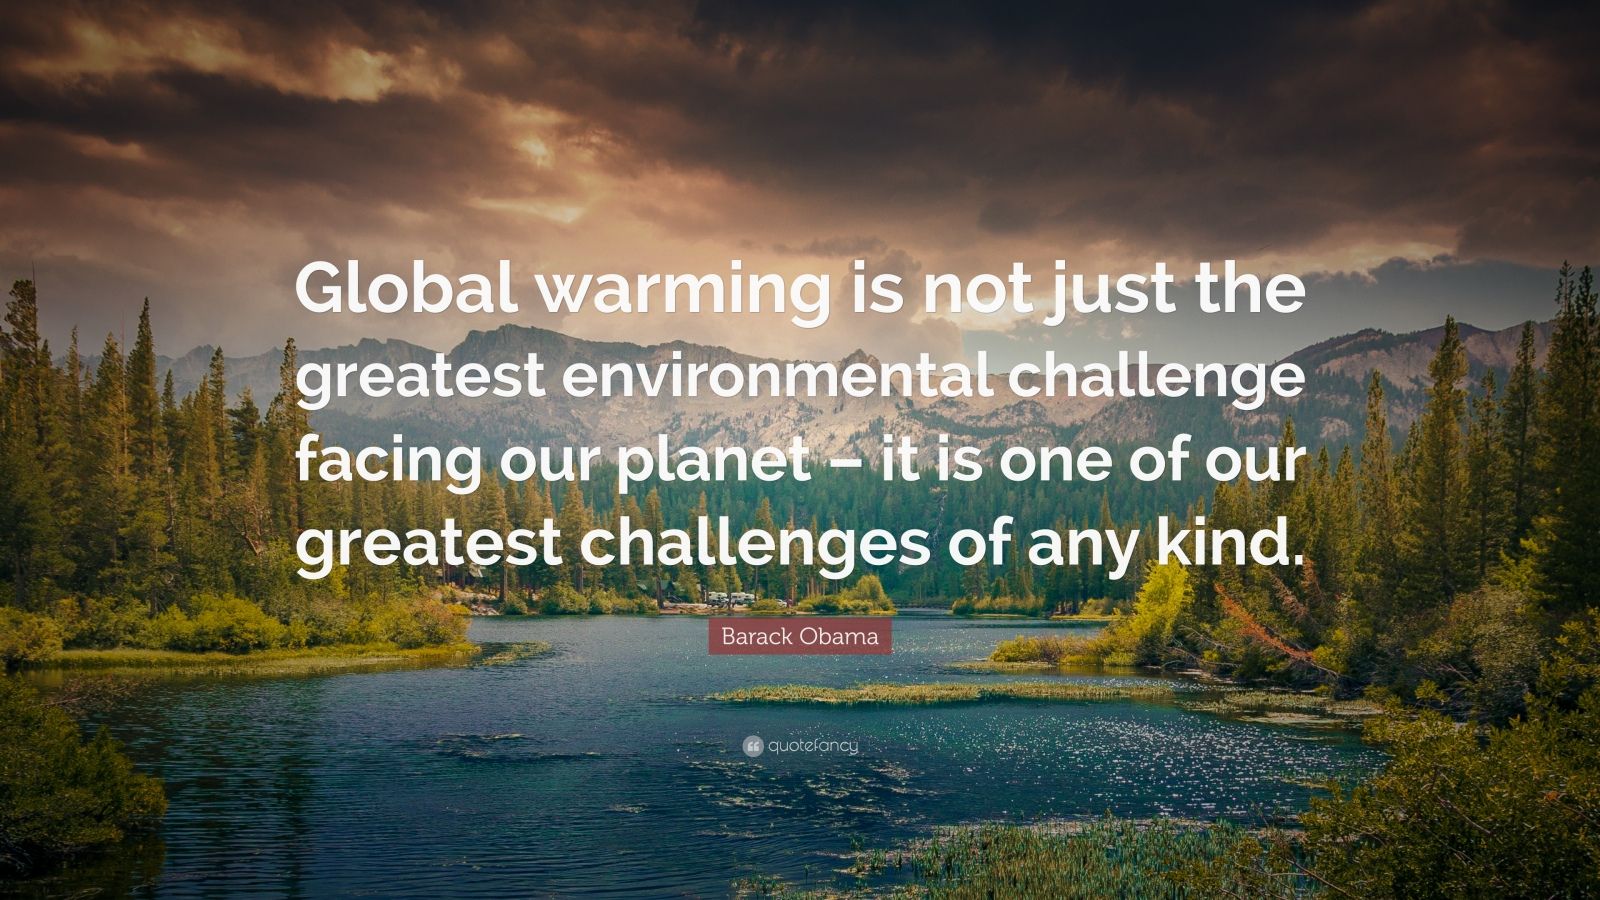 Barack Obama Quote: “Global warming is not just the greatest